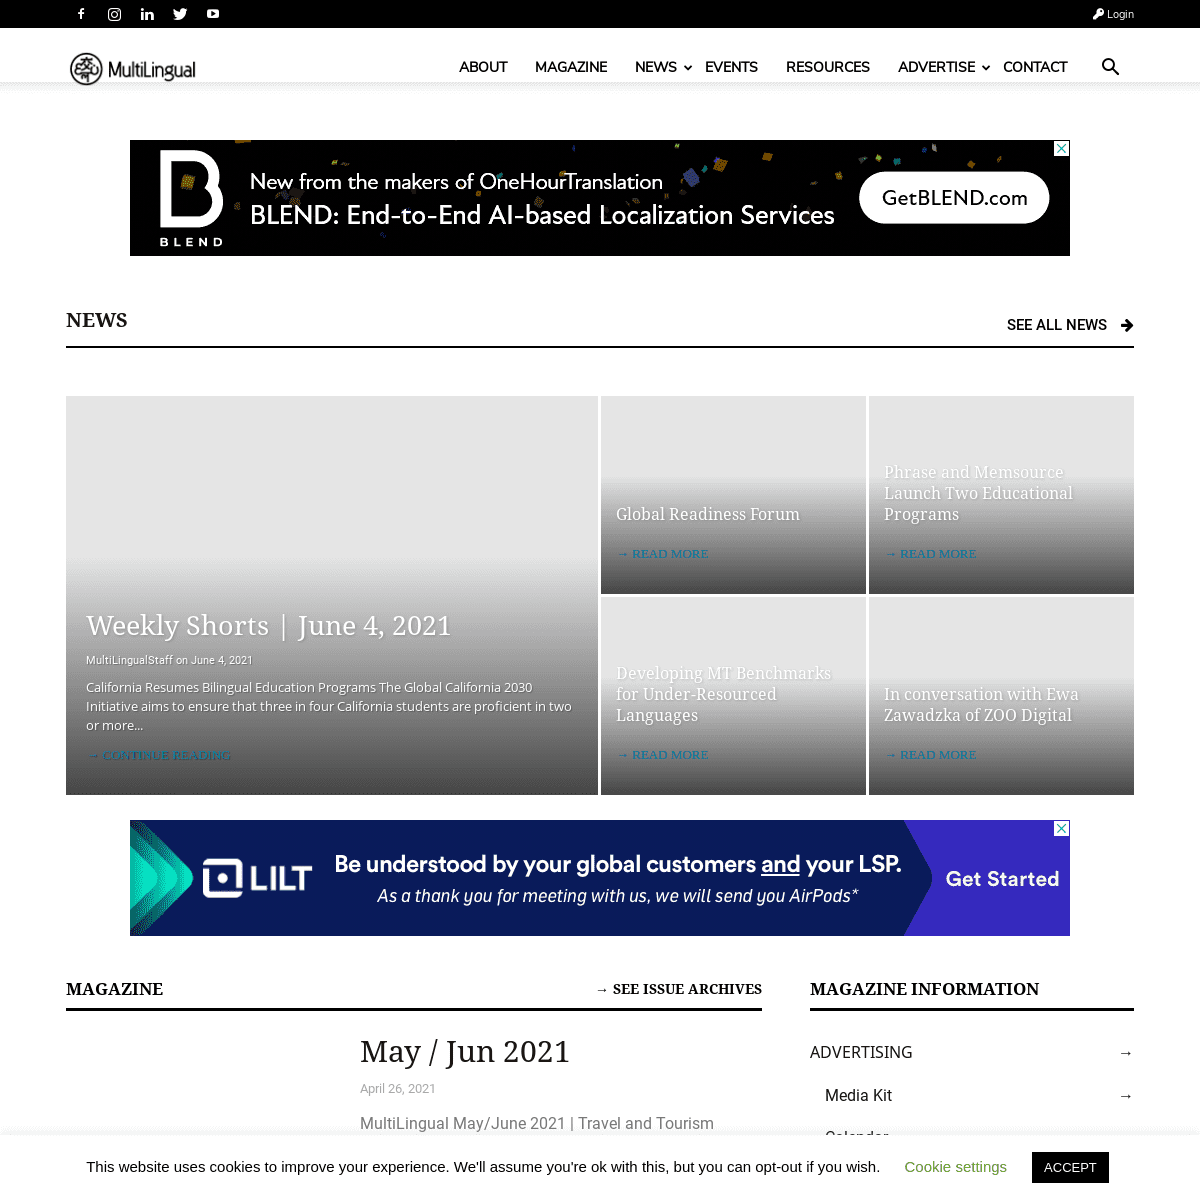 A complete backup of https://multilingual.com